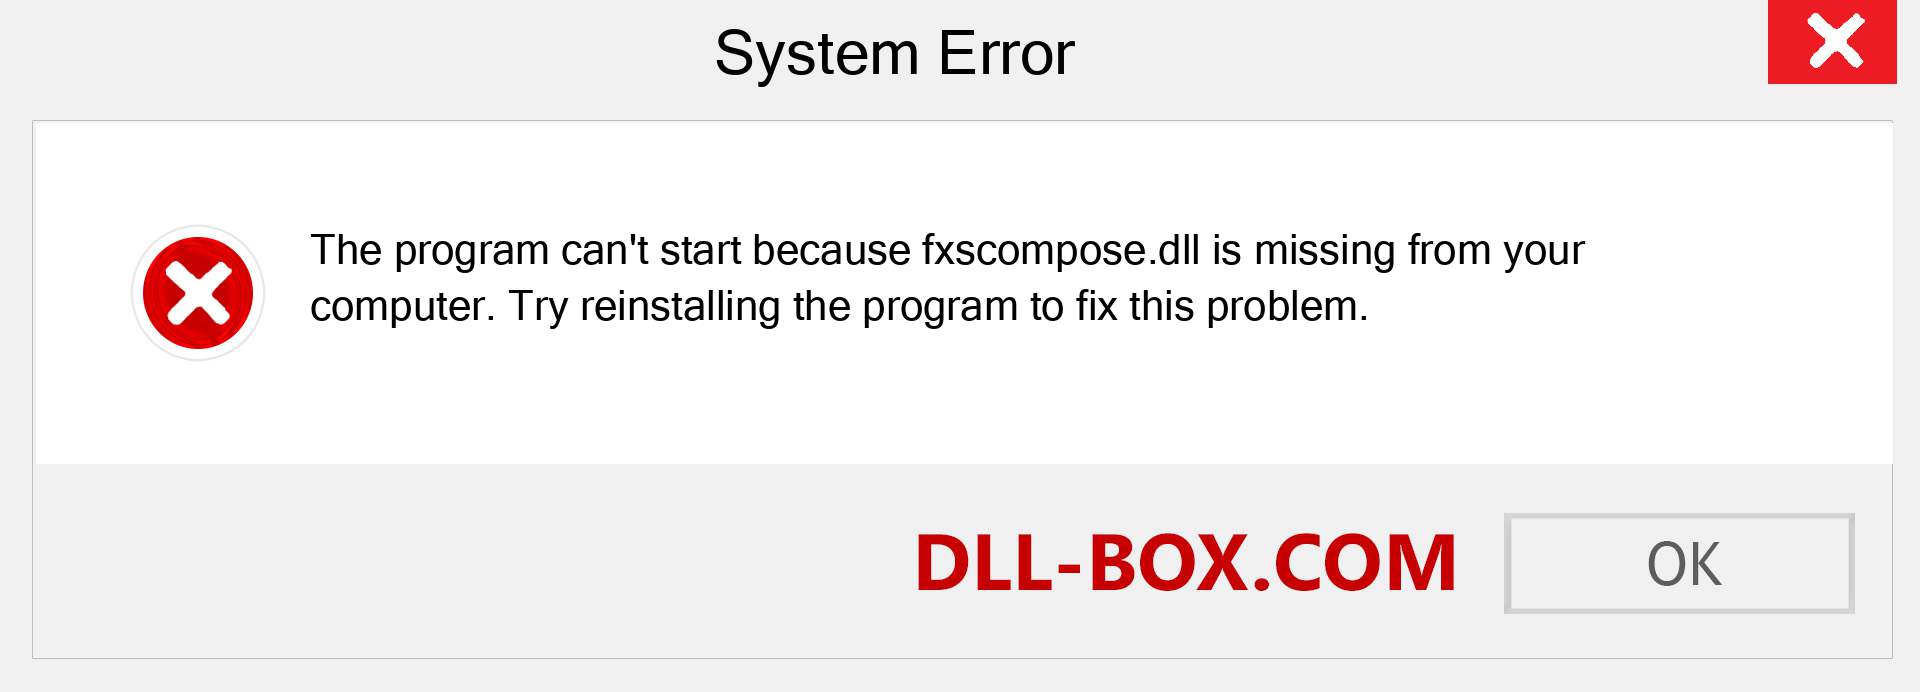  fxscompose.dll file is missing?. Download for Windows 7, 8, 10 - Fix  fxscompose dll Missing Error on Windows, photos, images